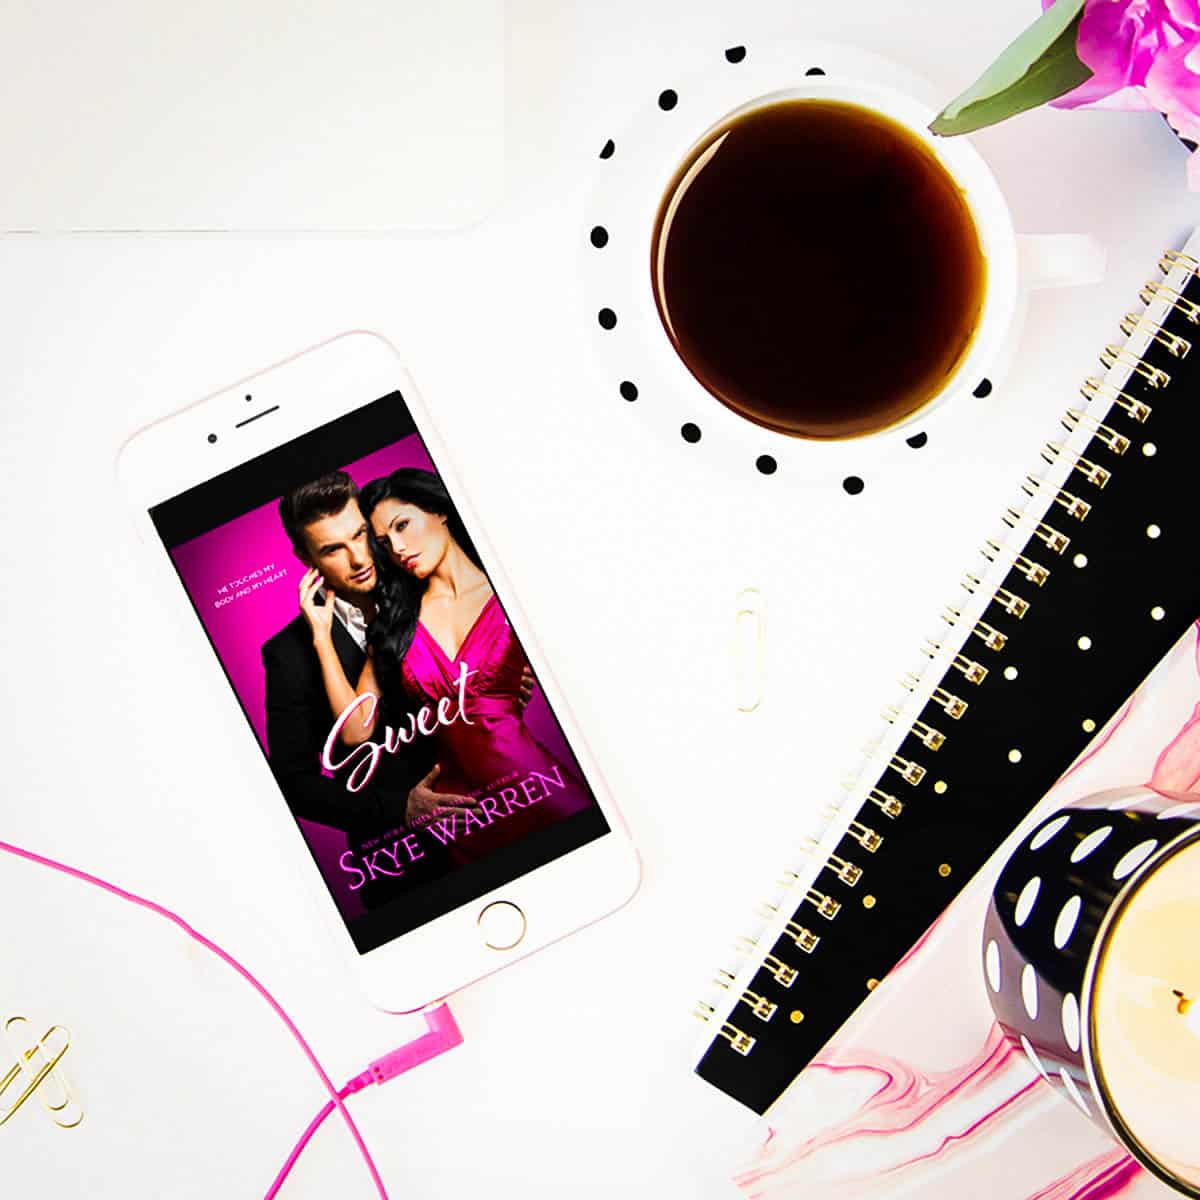 Sweet by Skye Warren is an erotic romance novella with a touch of suspense in the Chicago Underground world. Sweet features the story of Rose and Drew.